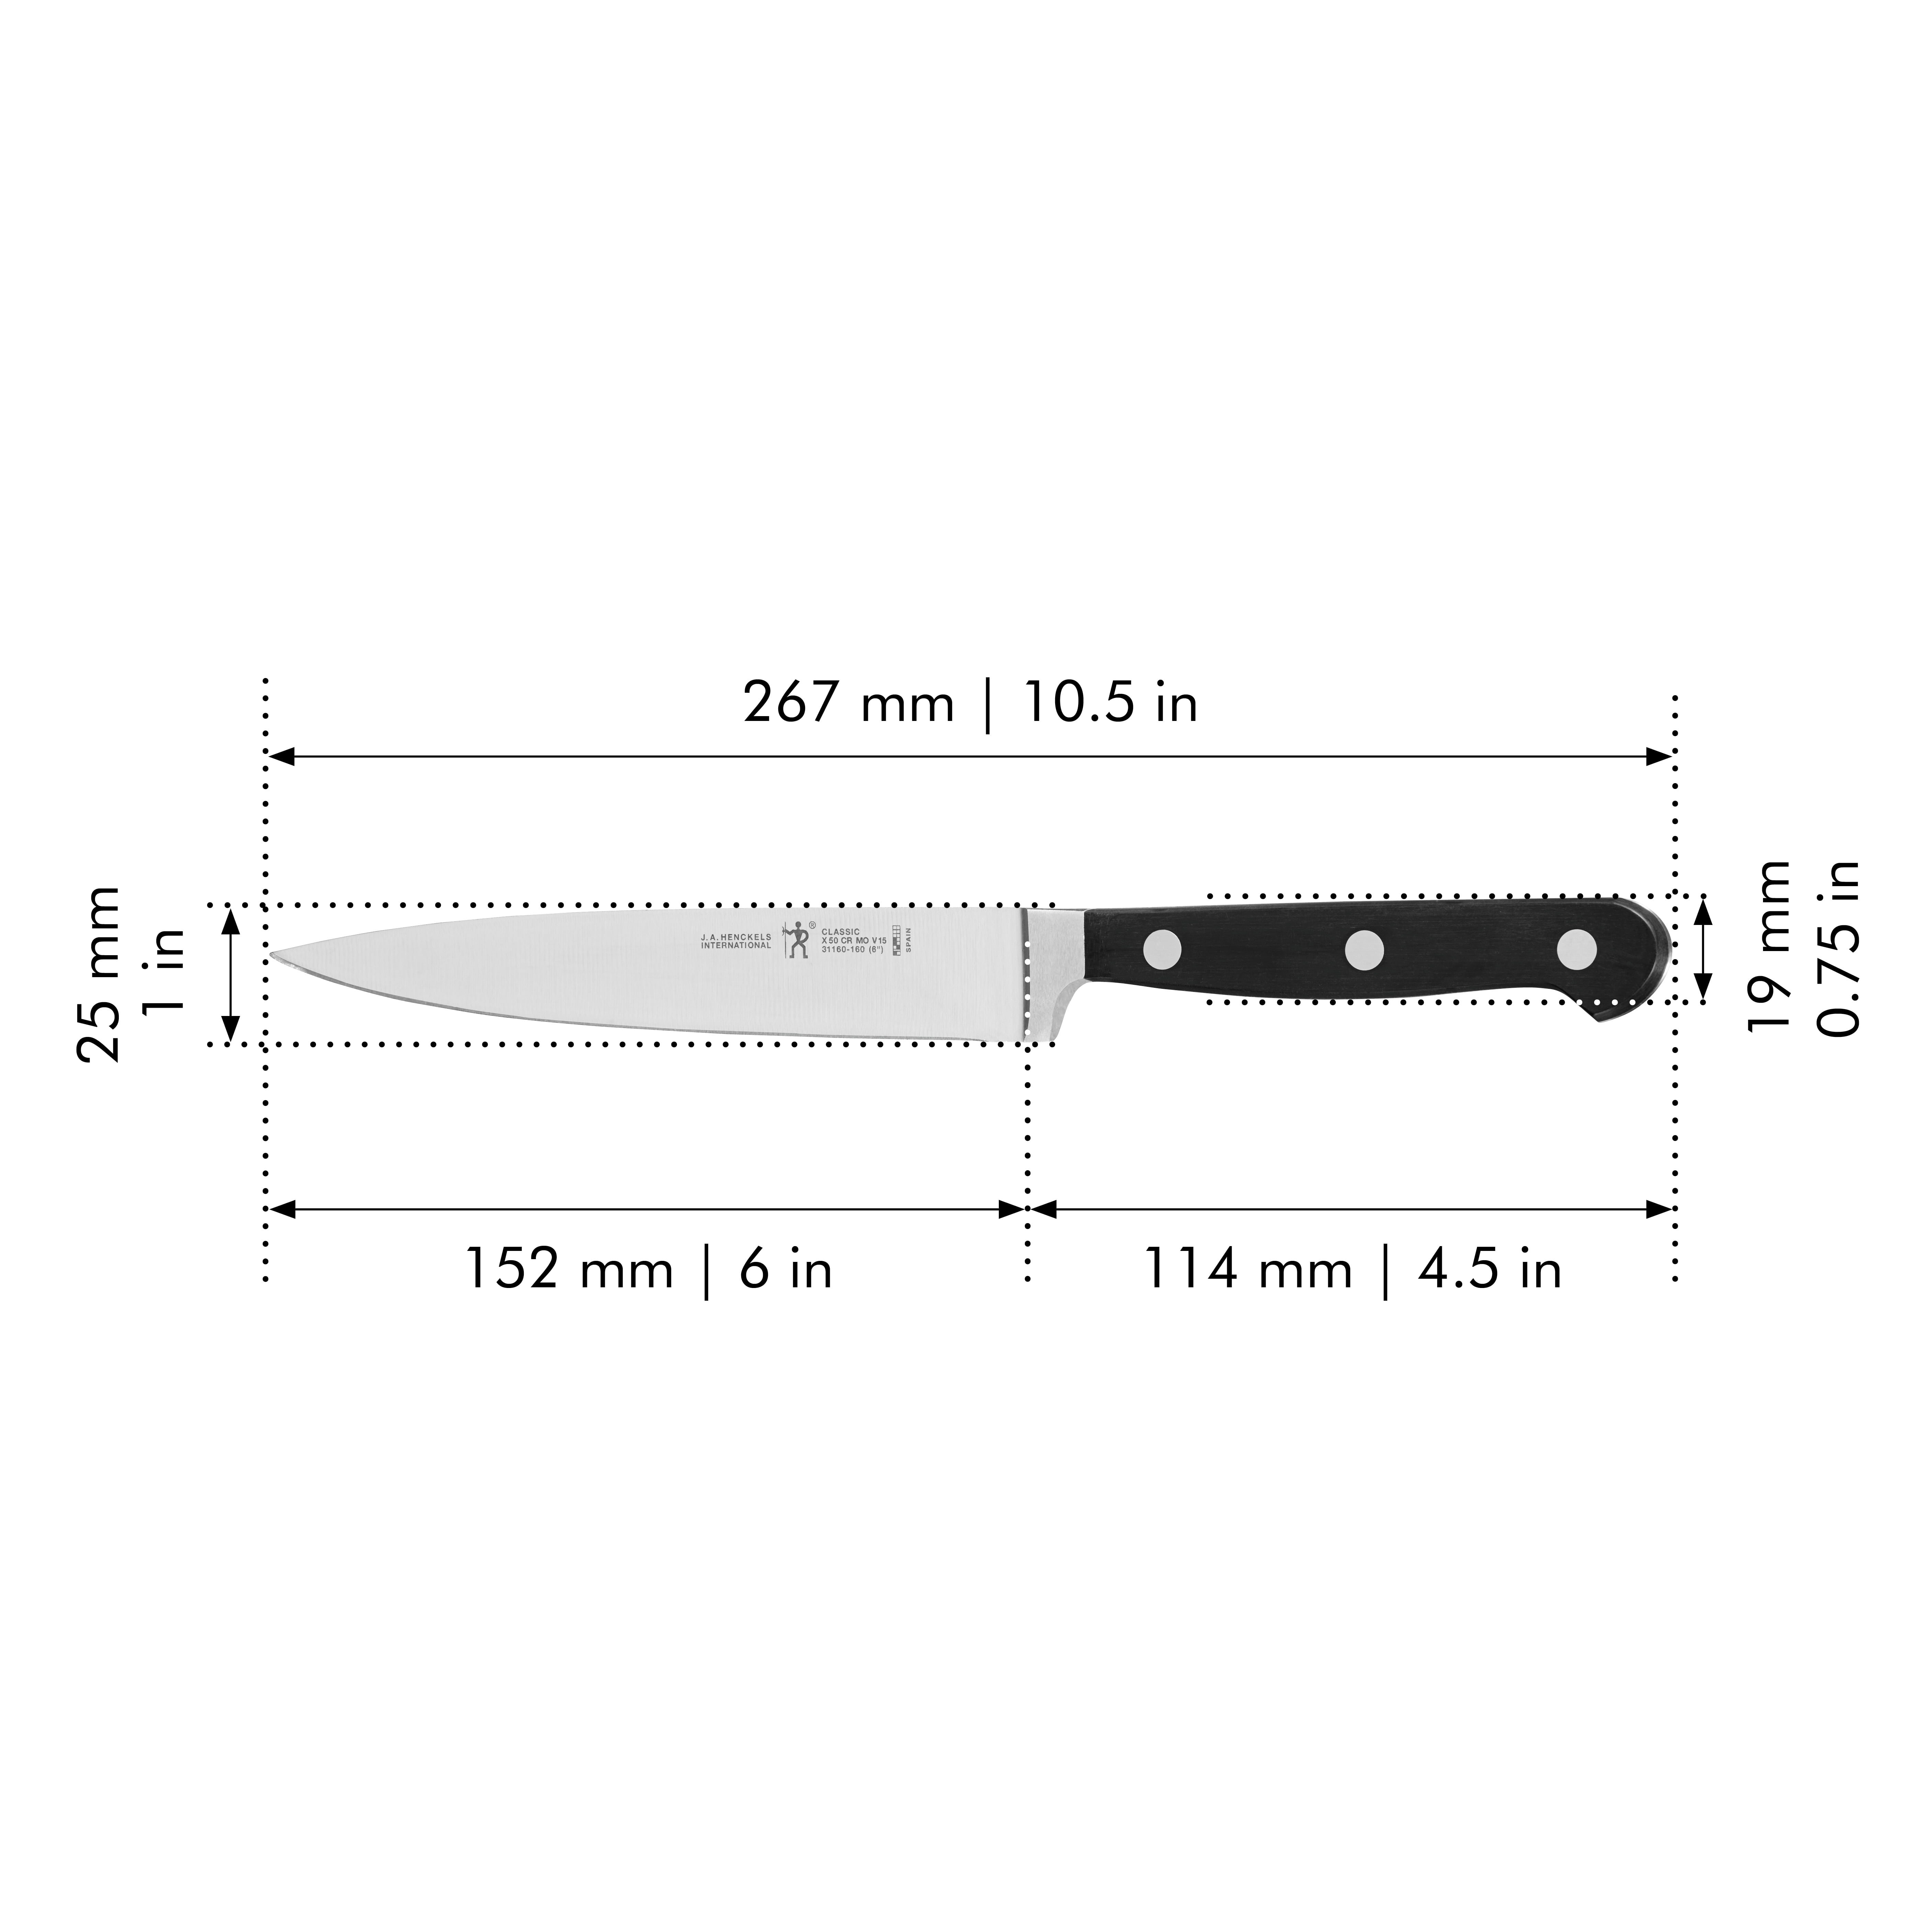 HENCKELS CLASSIC 6-inch Utility Knife - Visual Imperfections